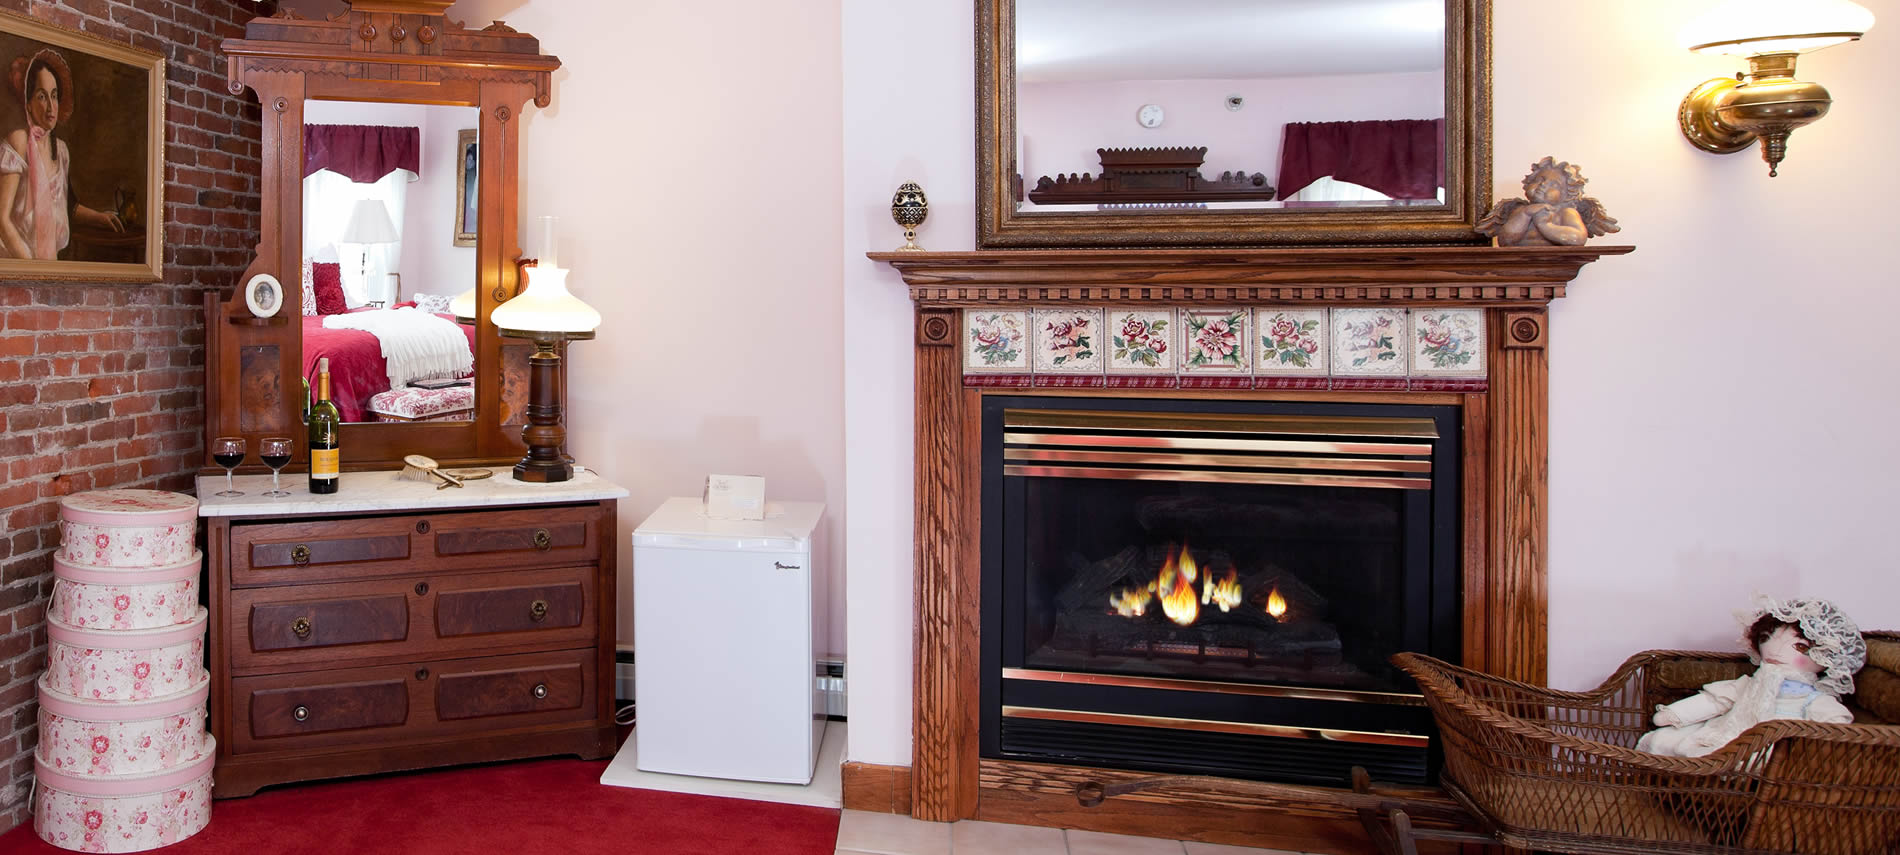 Prince Alfred guest room fireplace with wall mirror and dresser with mirror